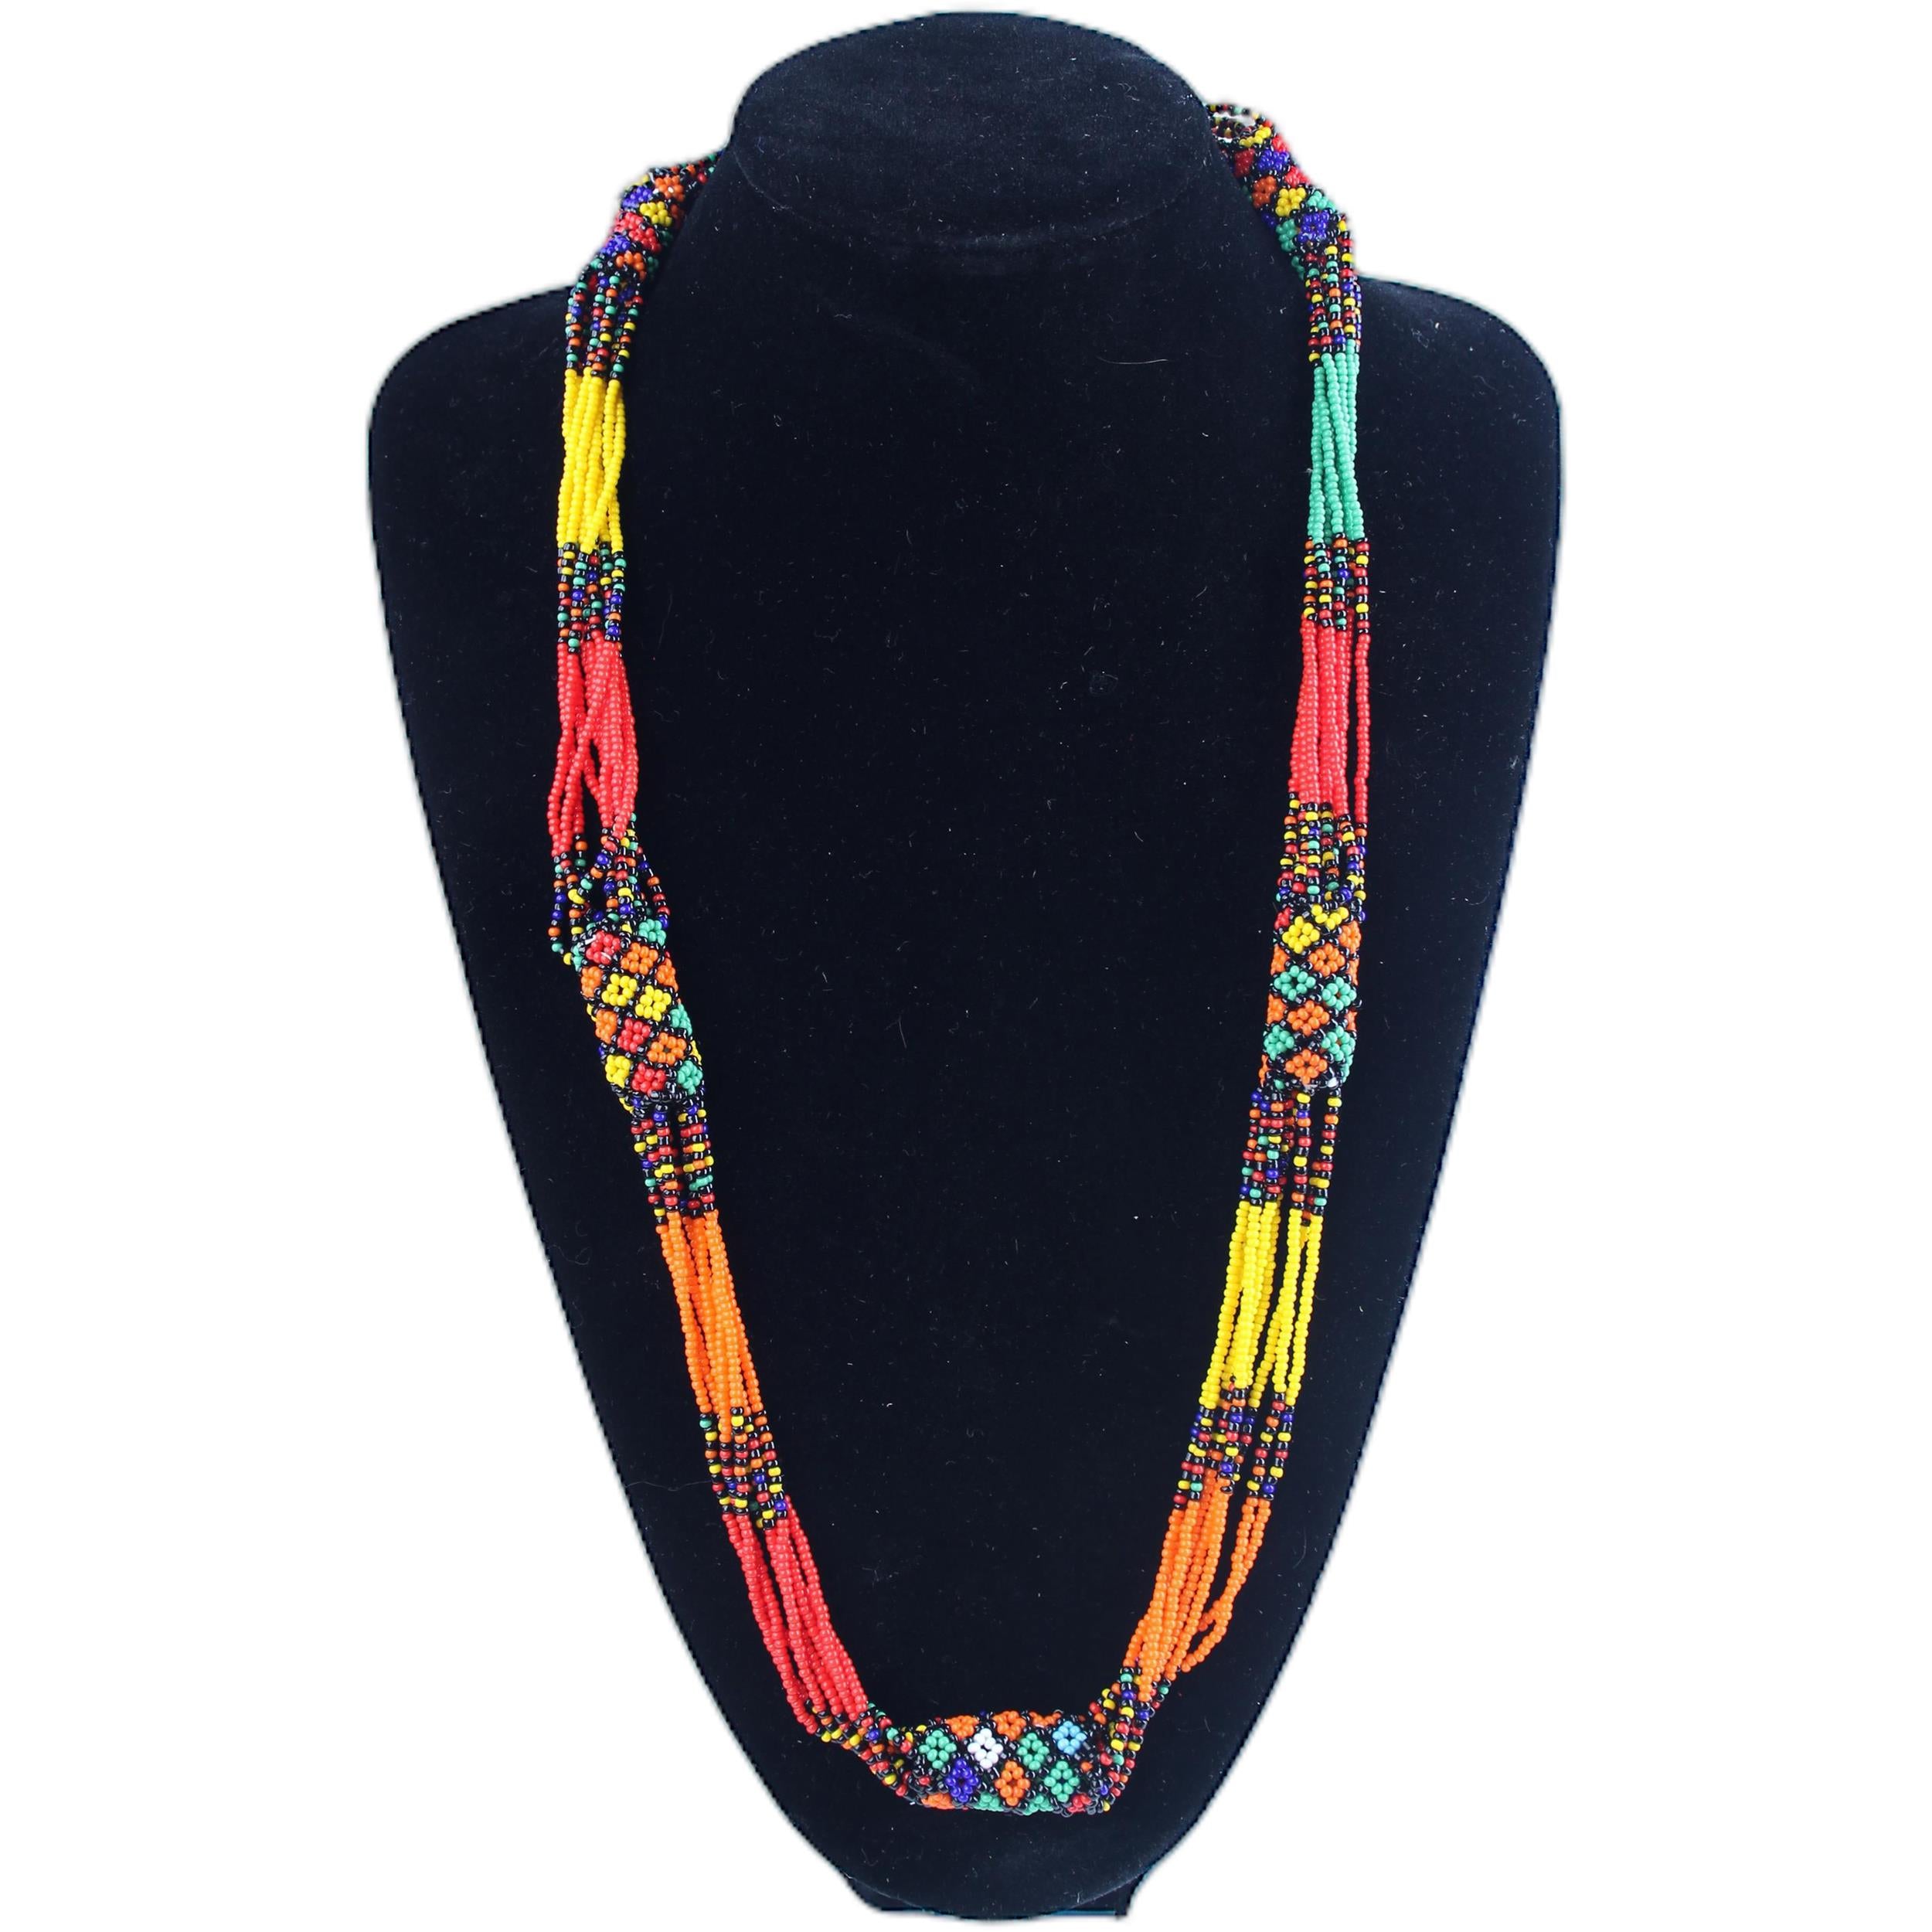 Zulu Tribe Necklaces ~0.4" Tall - Necklaces